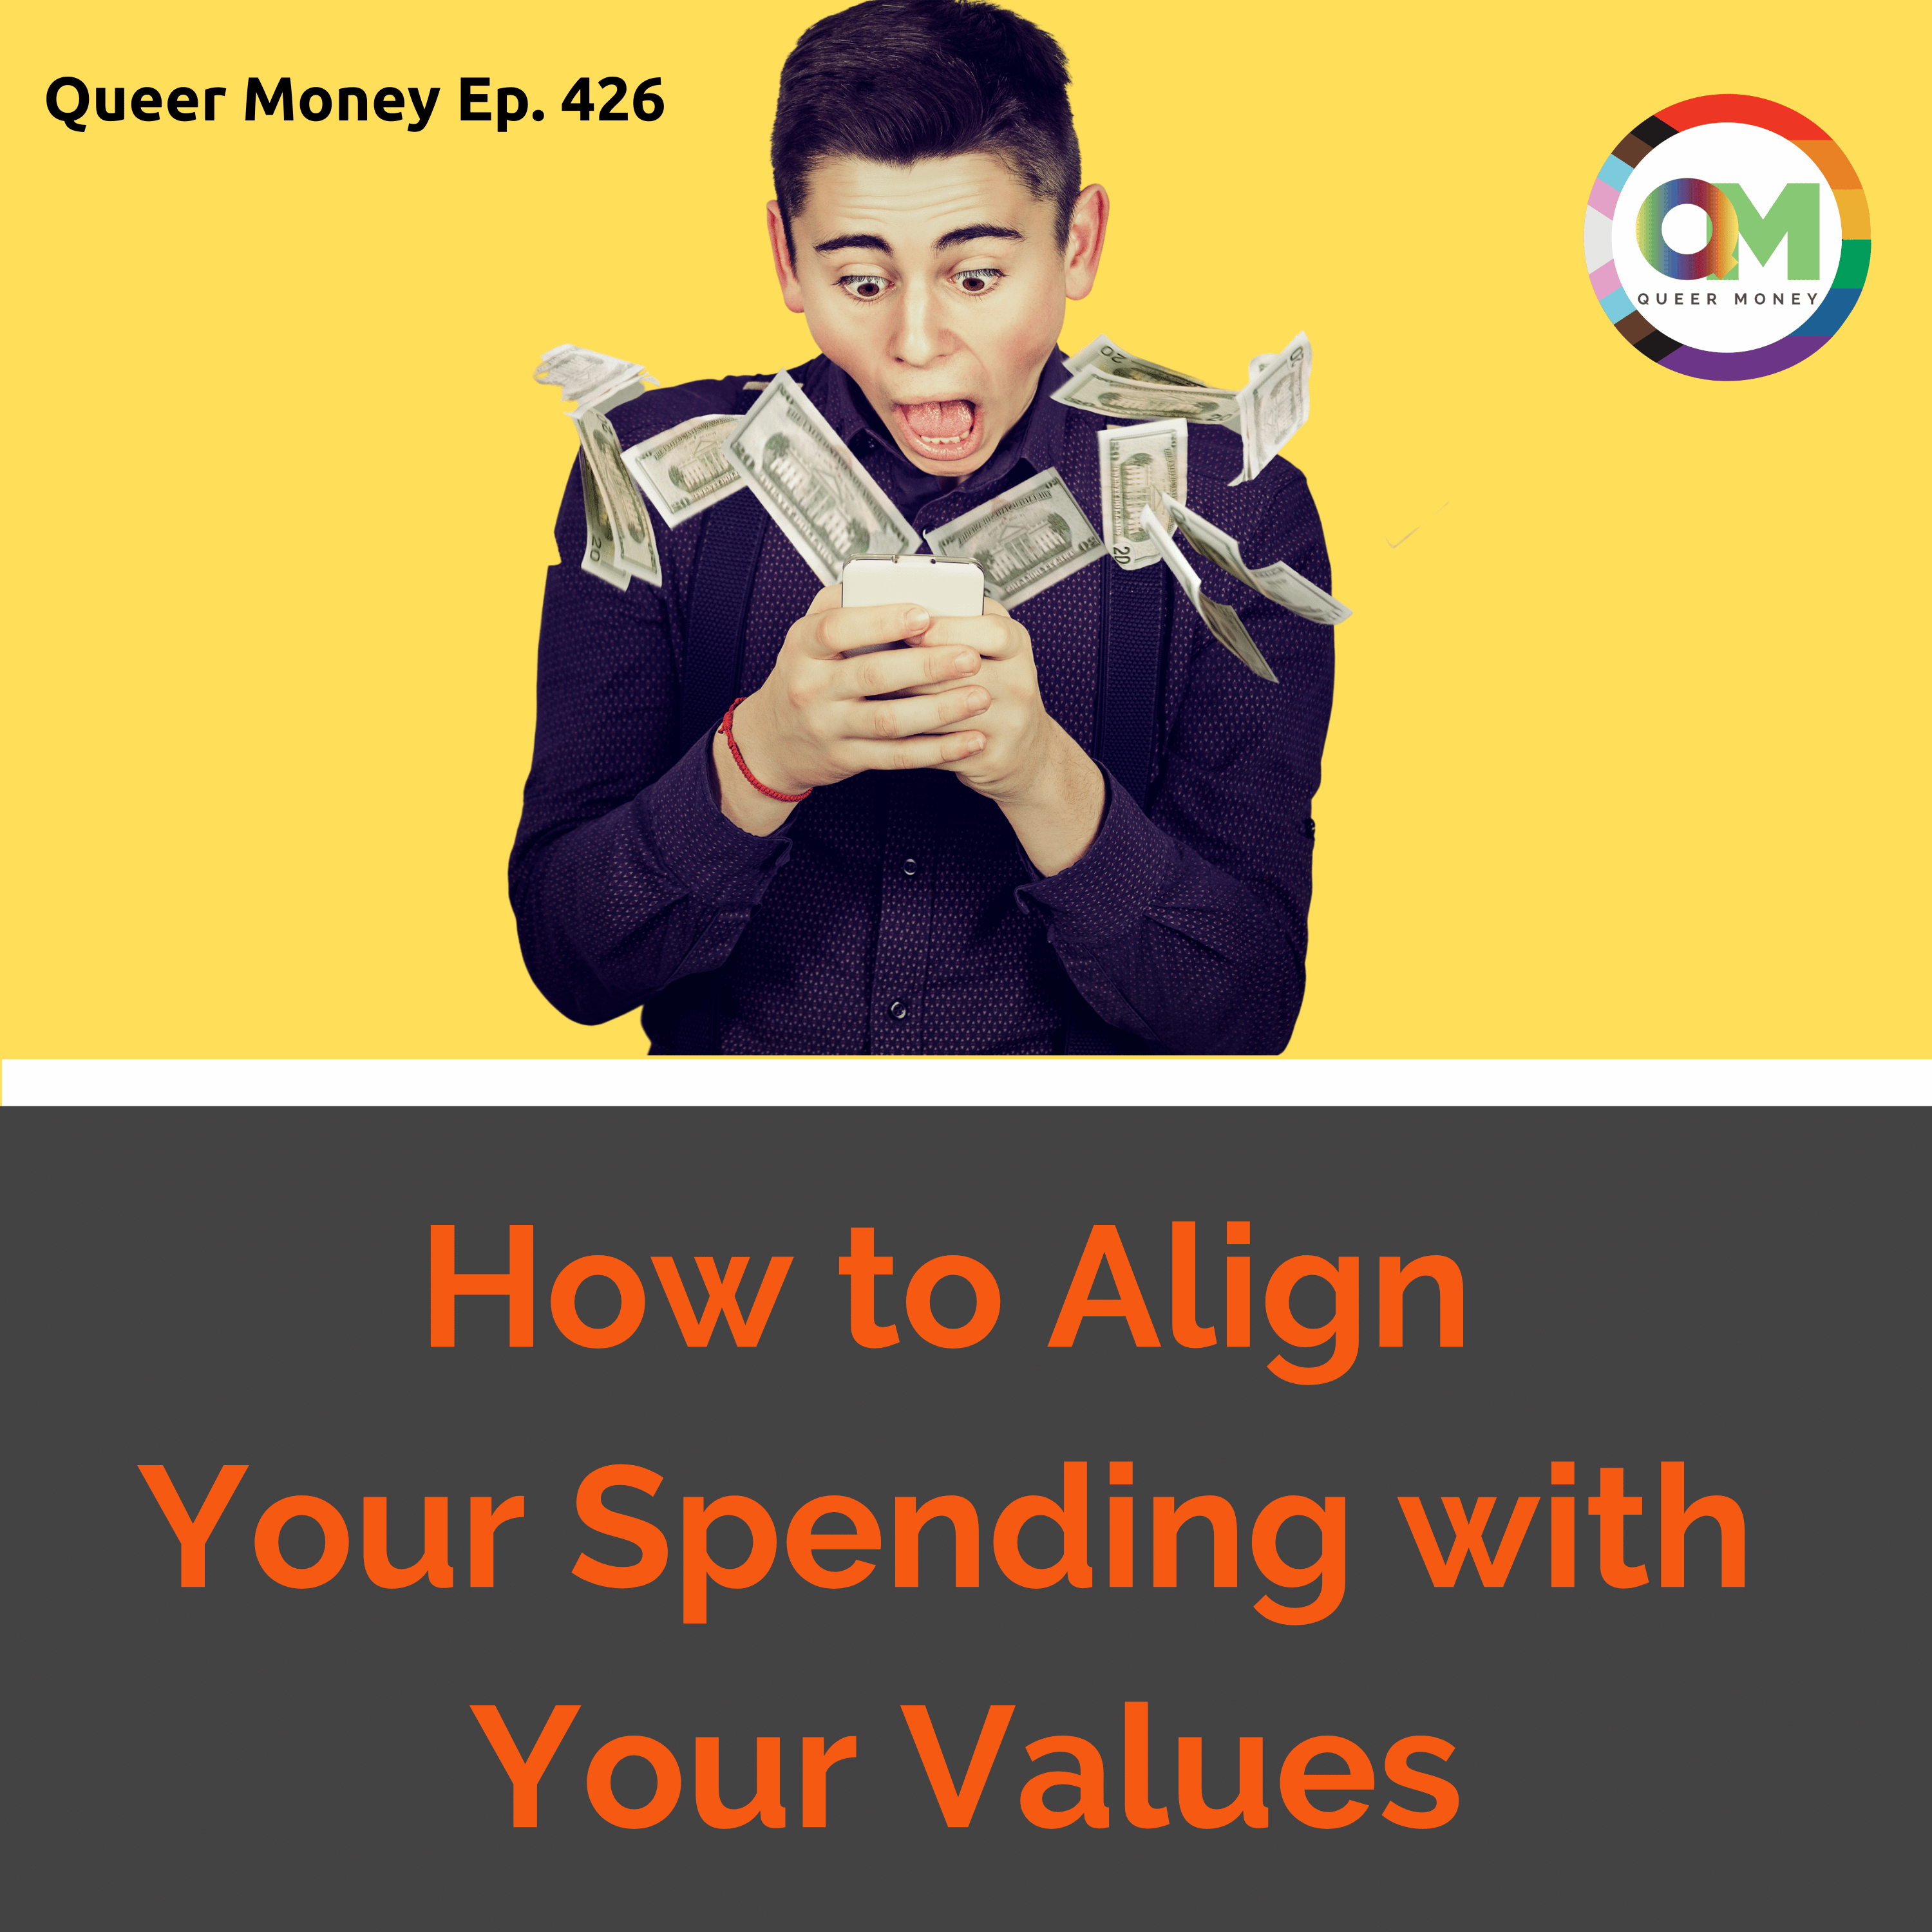 How to Align Your Spending with Your Values | Queer Money Ep. 426